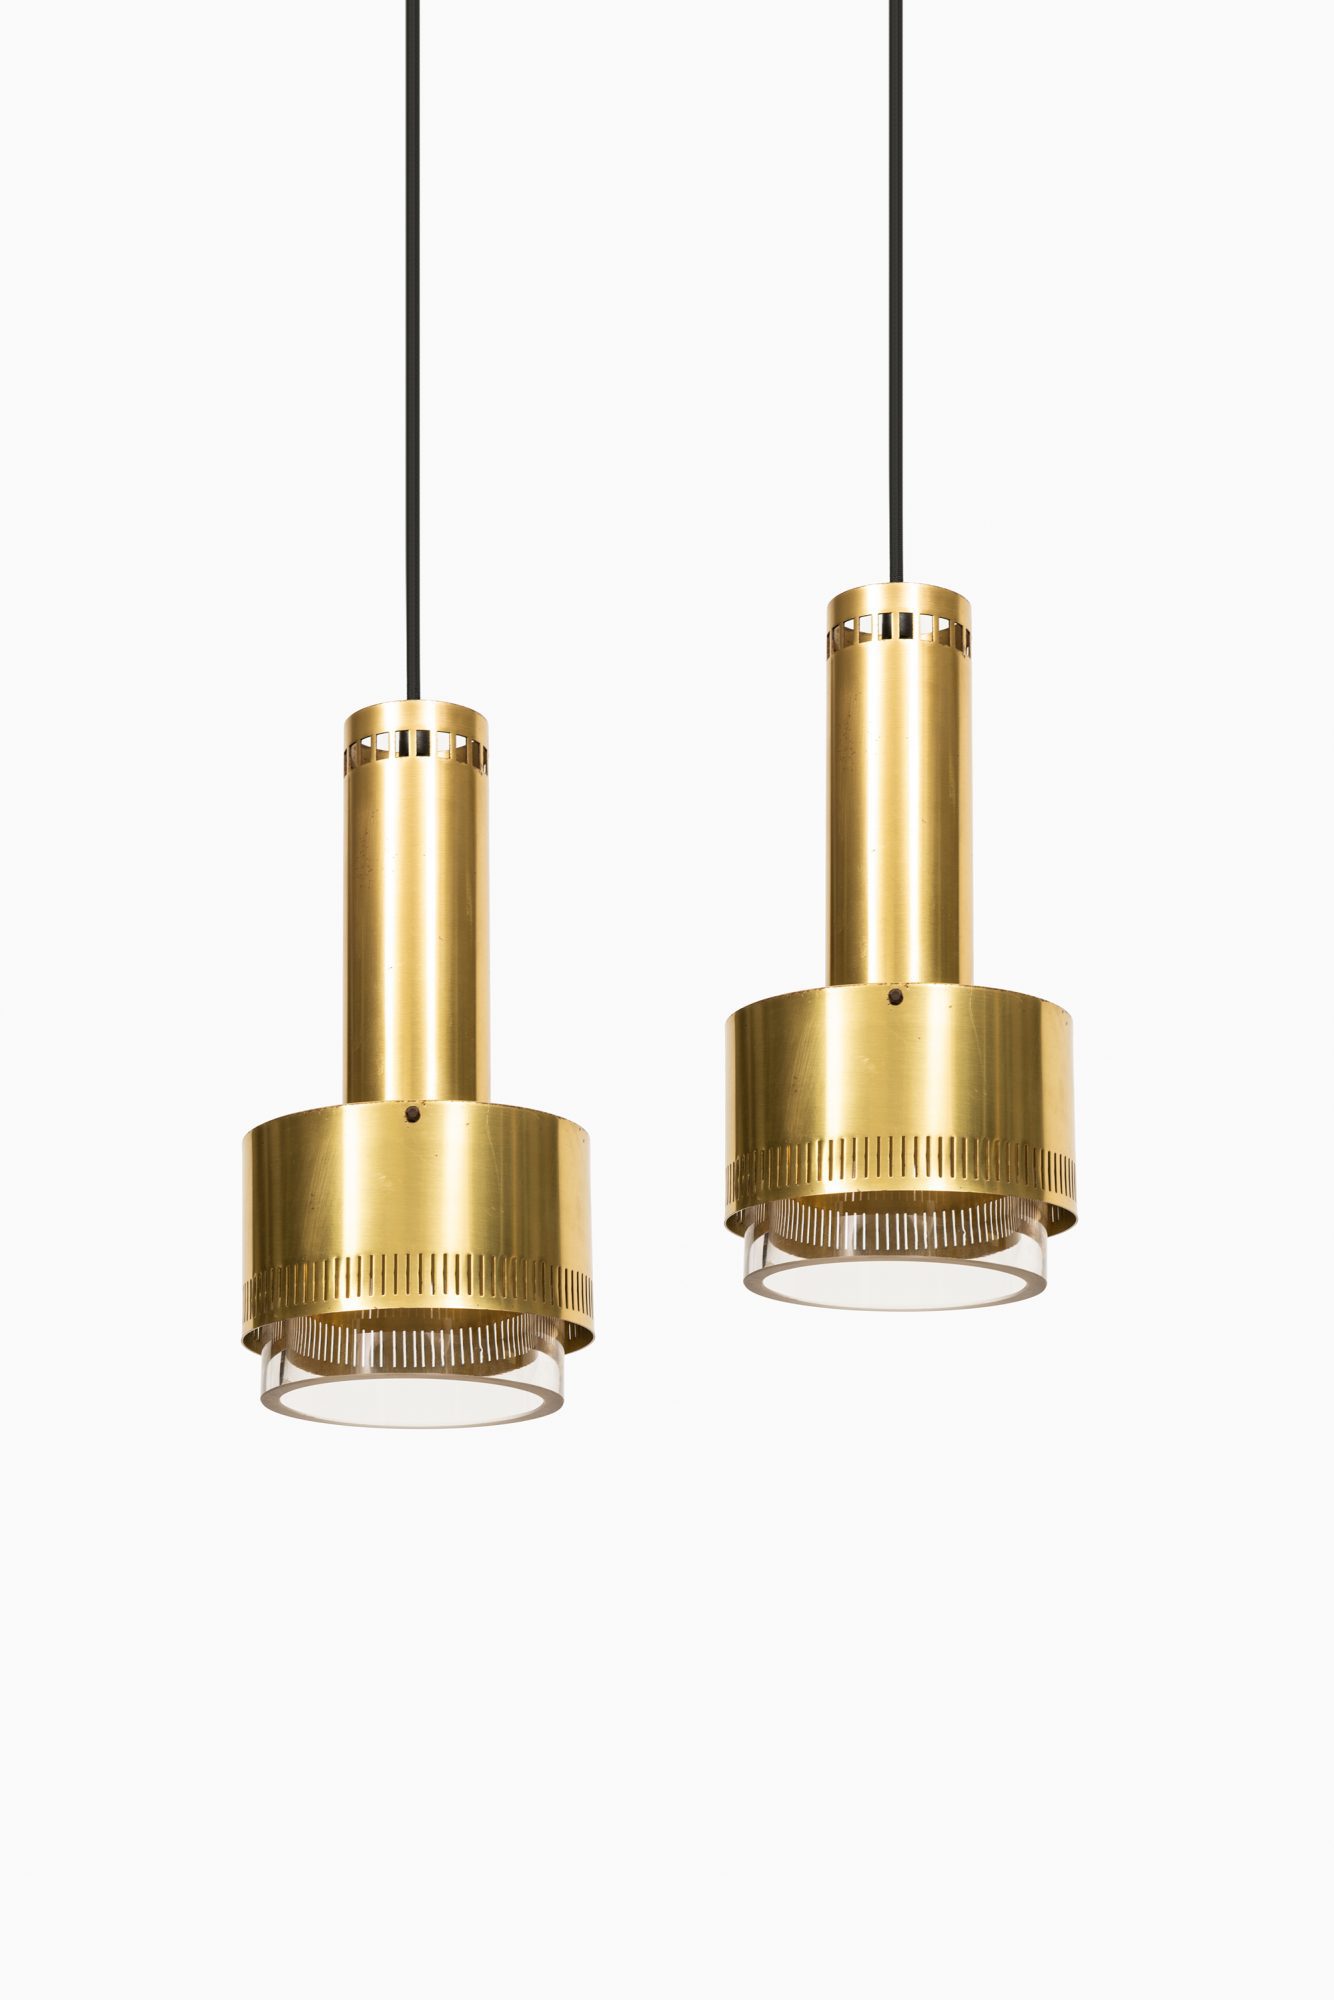 Kay Kørbing ceiling lamps produced by Lyfa at Studio Schalling